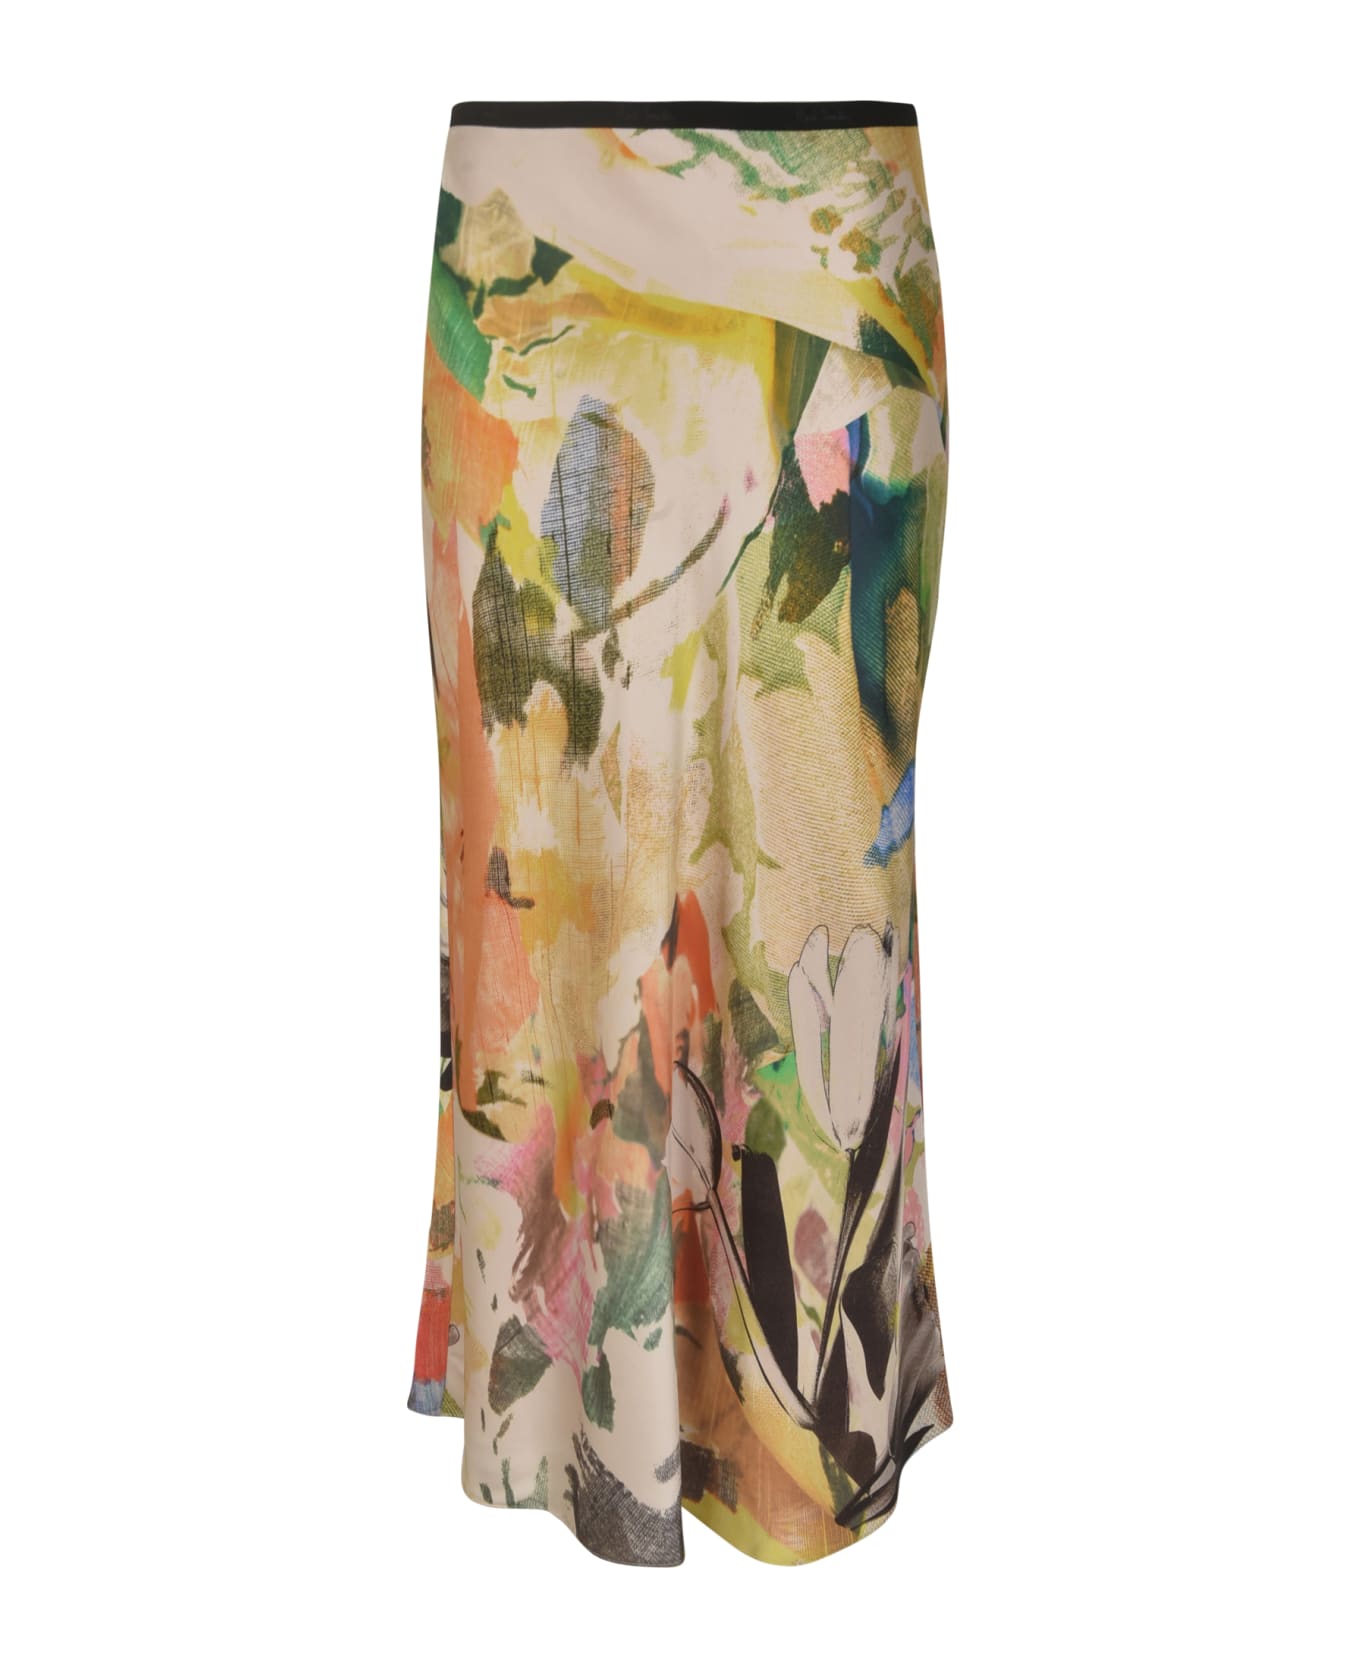 Paul Smith Floral Printed Skirt - Multicolor